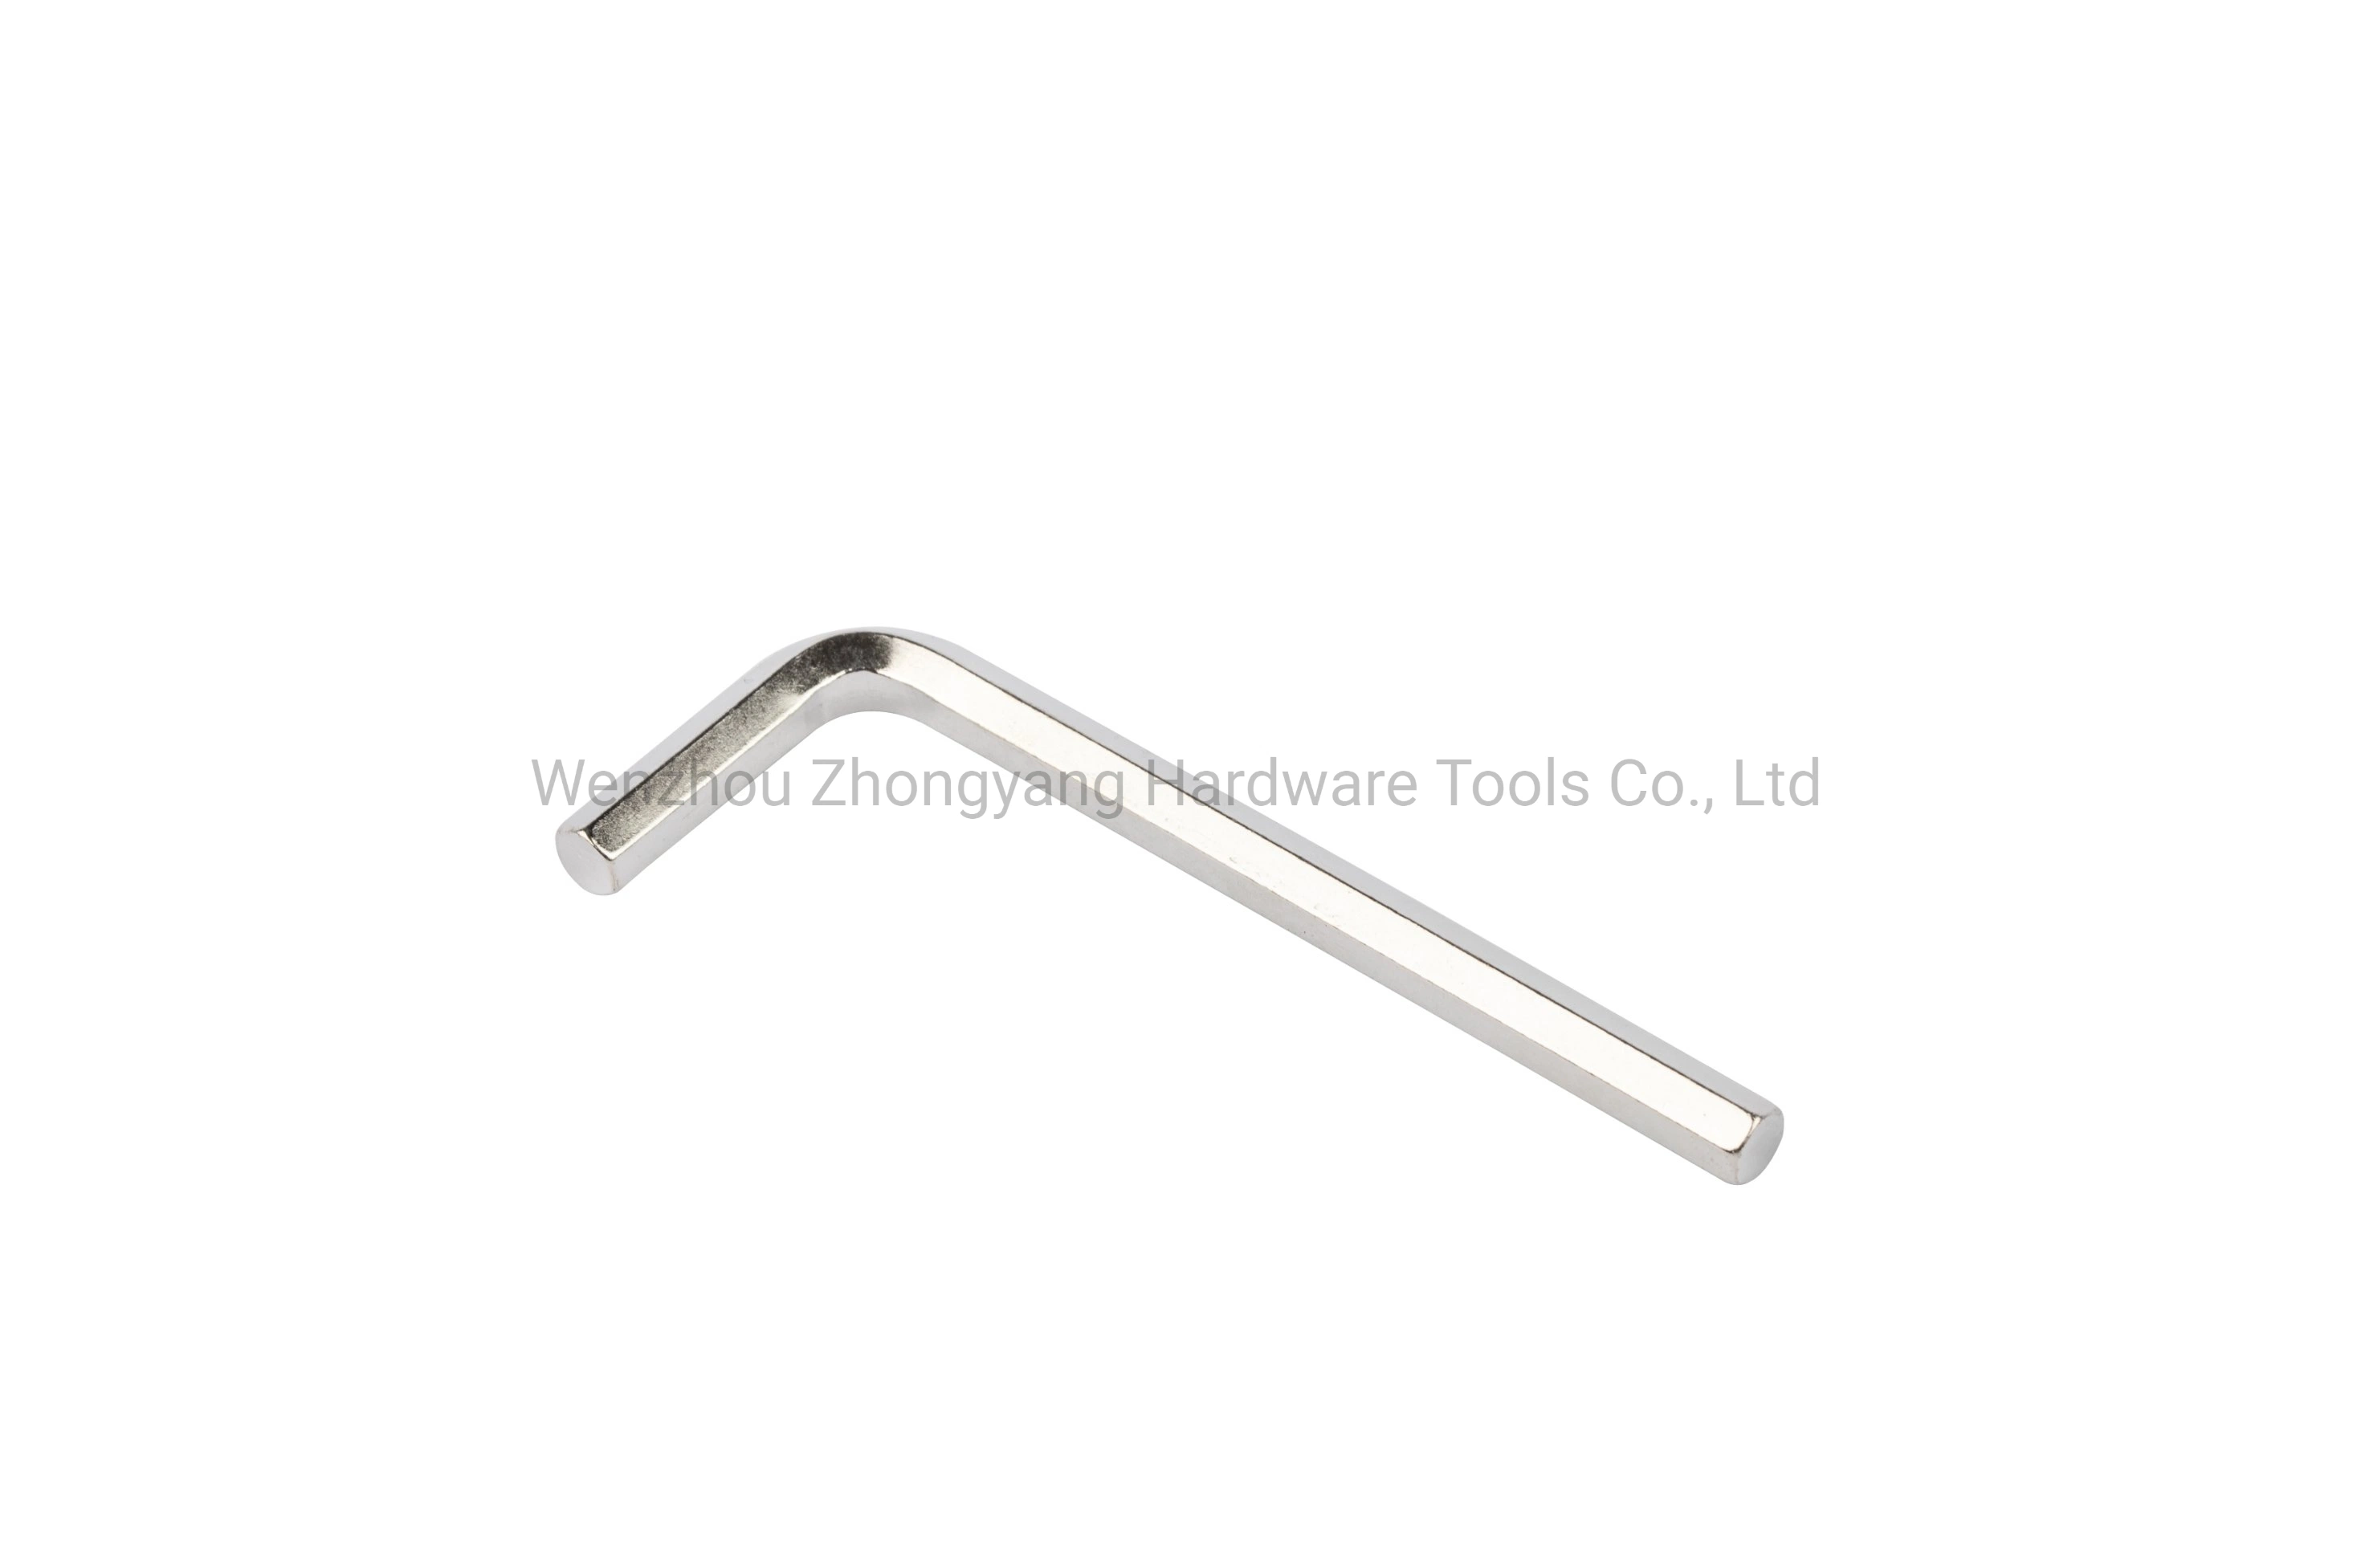 Best Price Allen Key Hex Key High Quality Allen Wrench From China Factory.